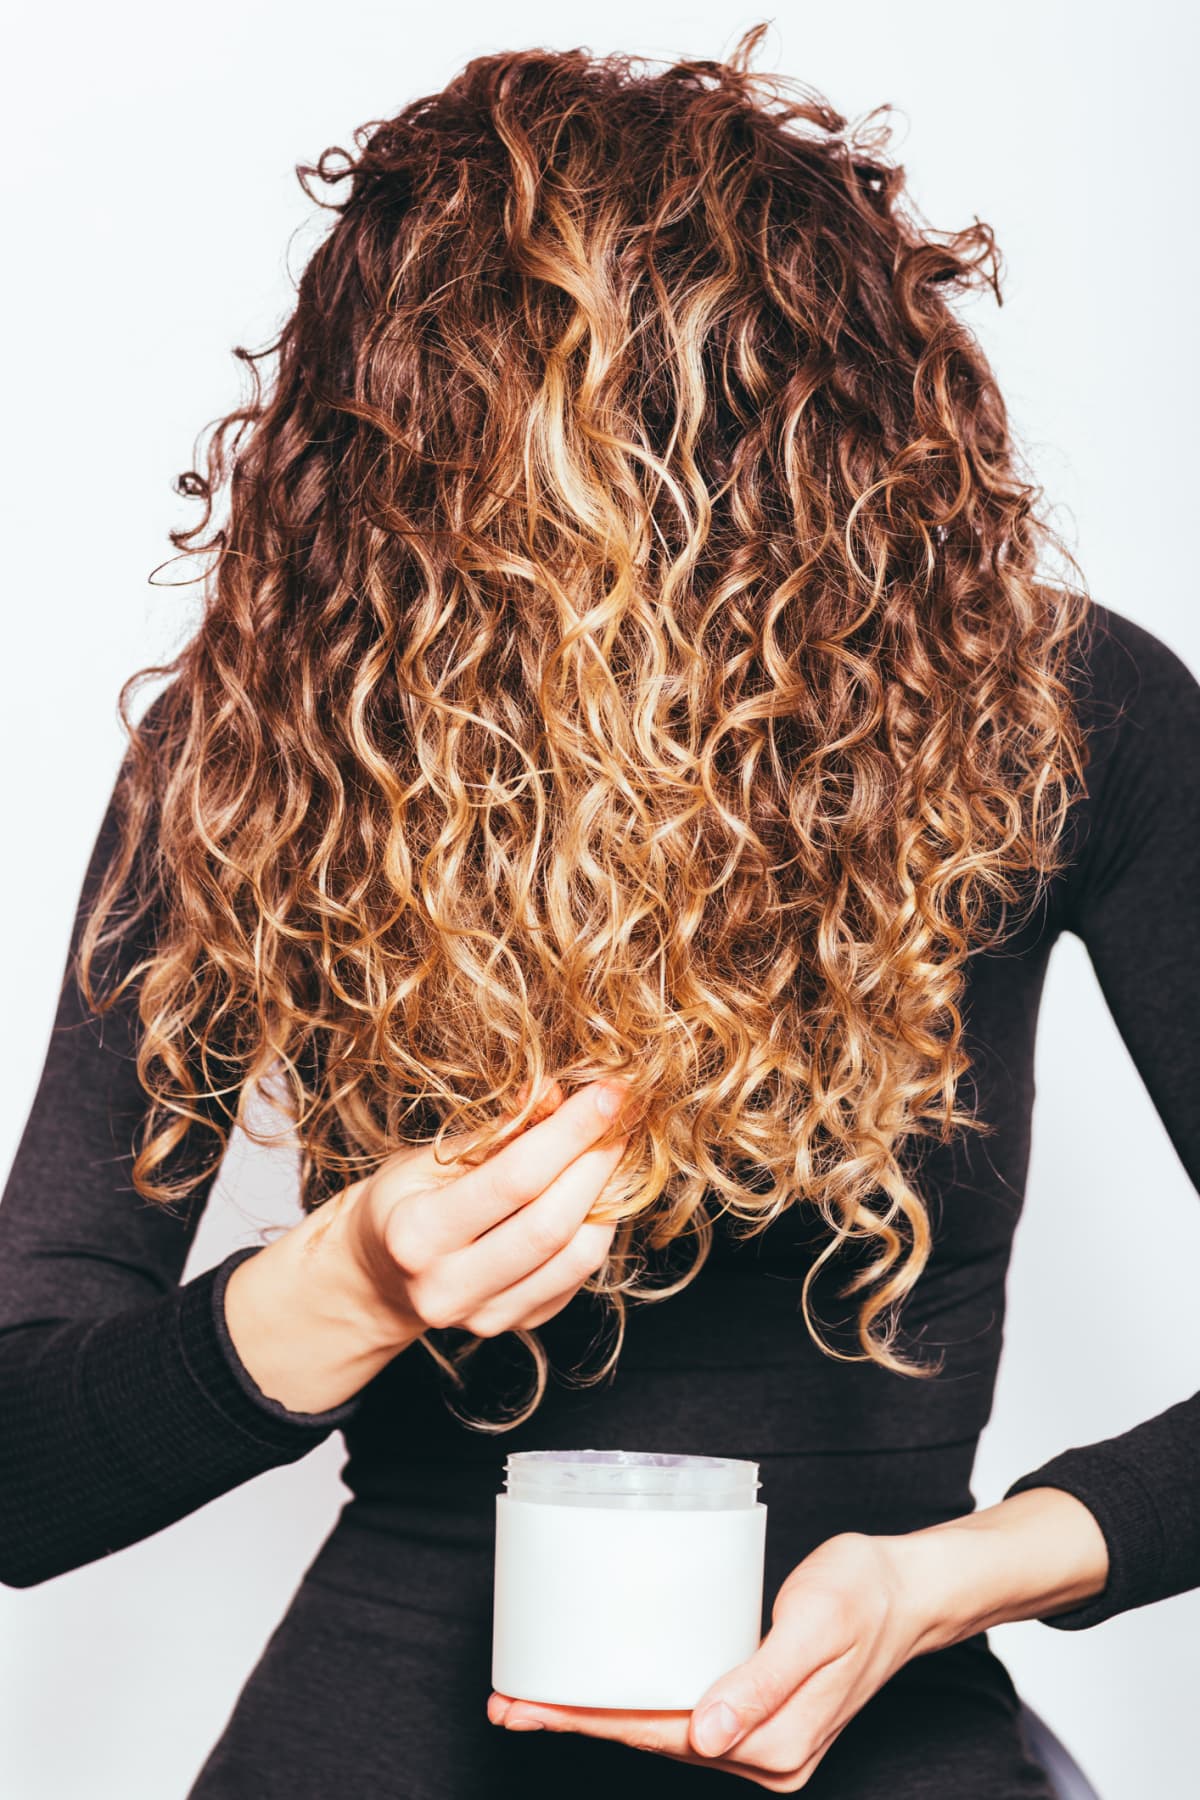 Woman with curly hair covering her face